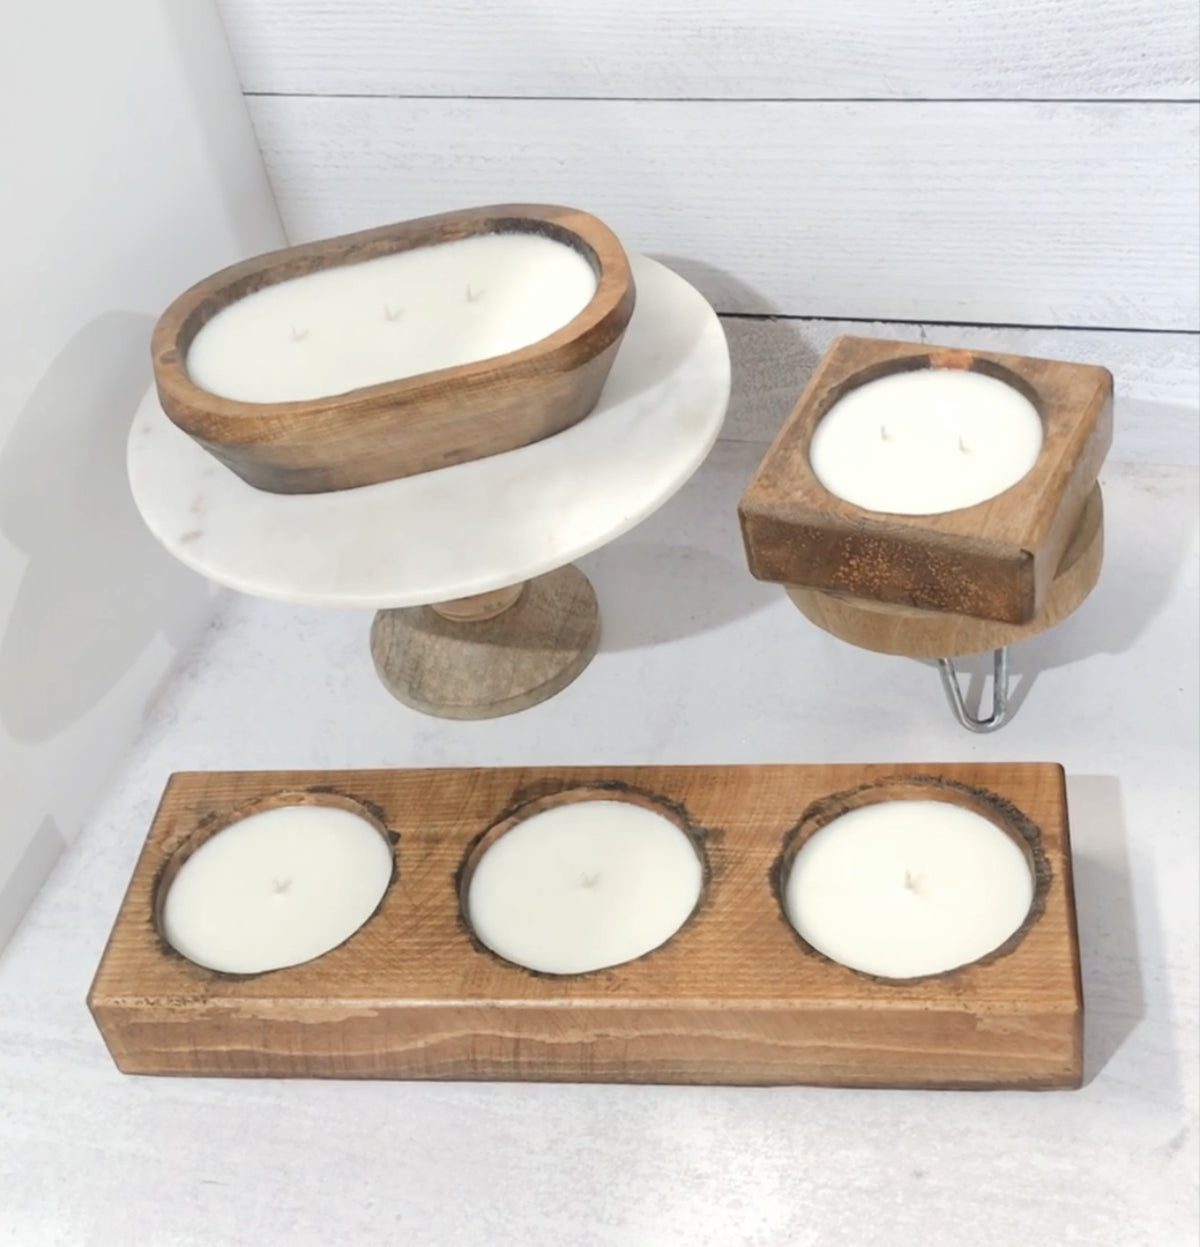 What Are Wooden Dough Bowl Candles?